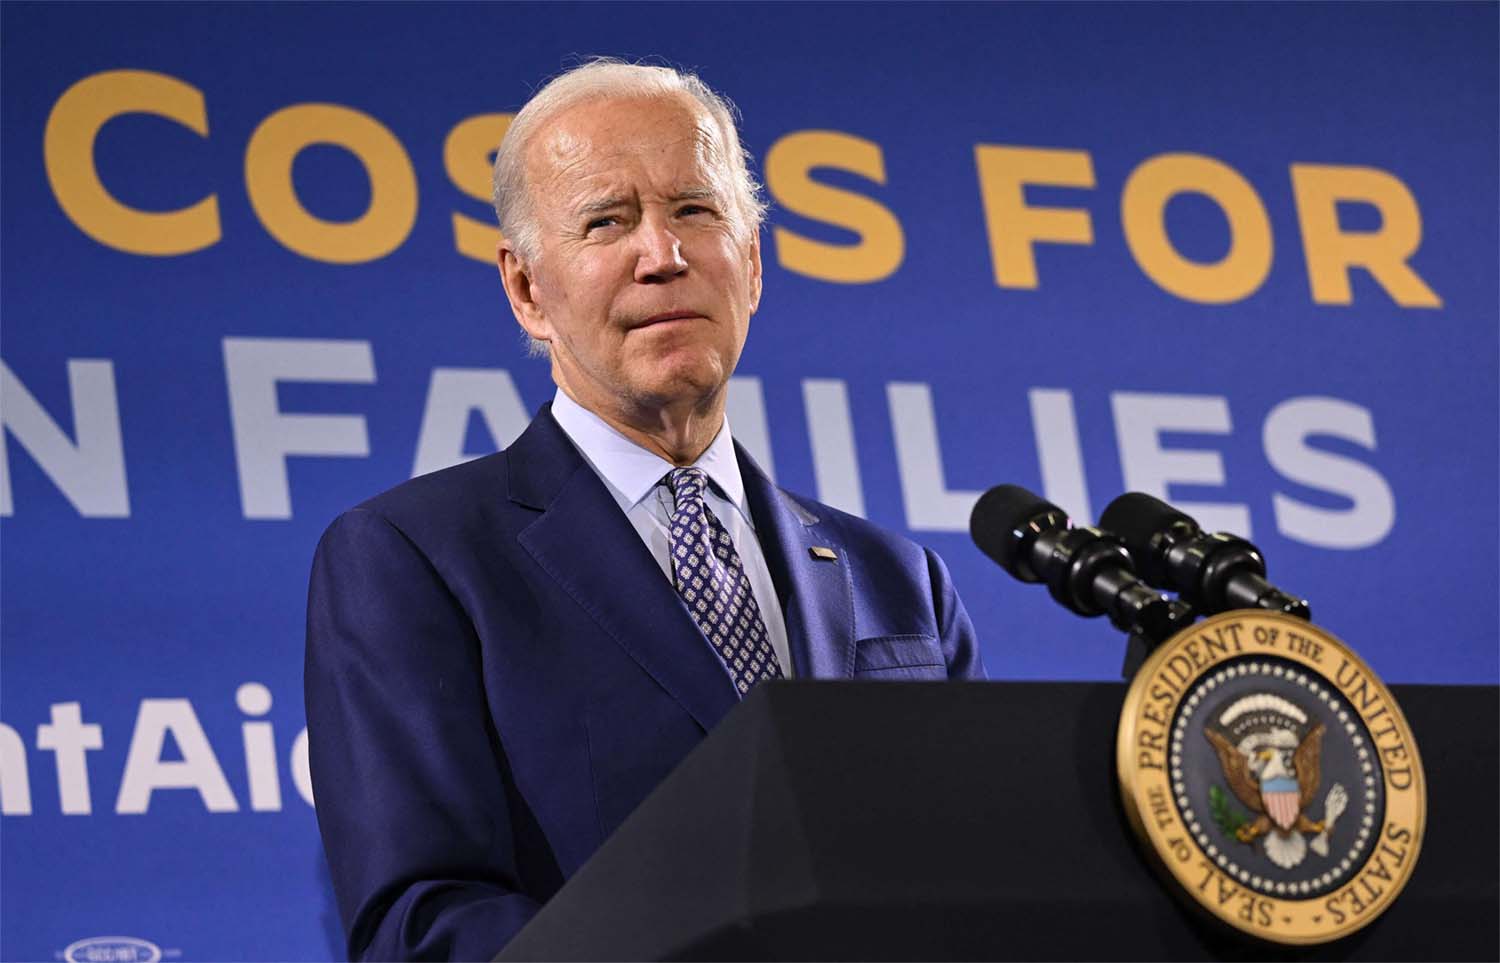 Biden made the comments as supporters in the crowd held up cellphones displaying the message “FREE IRAN”